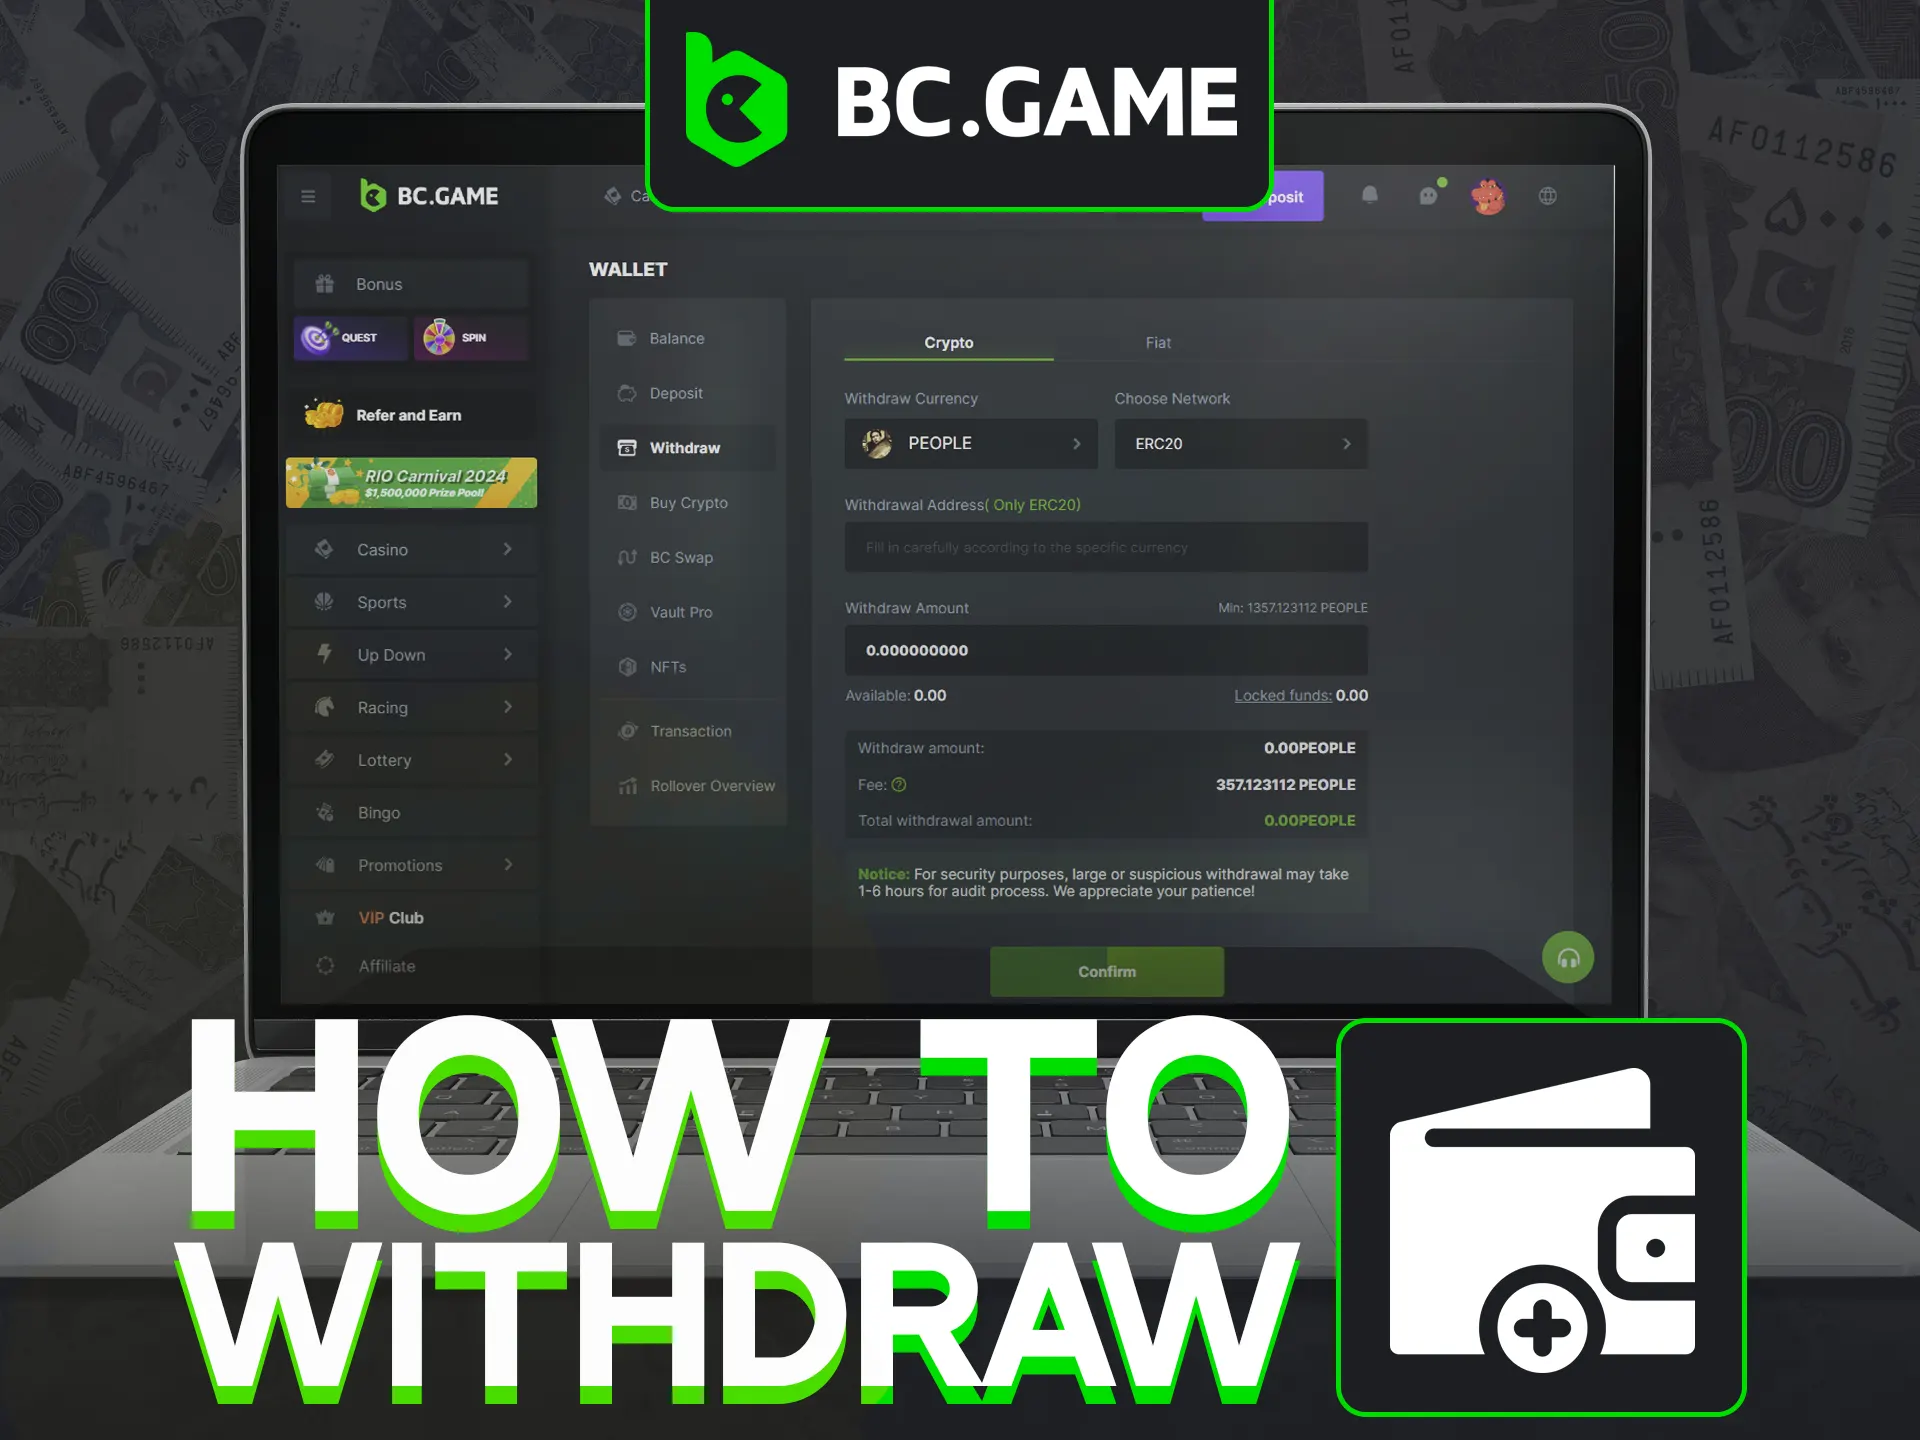 Withdraw money from BC Game account easily.